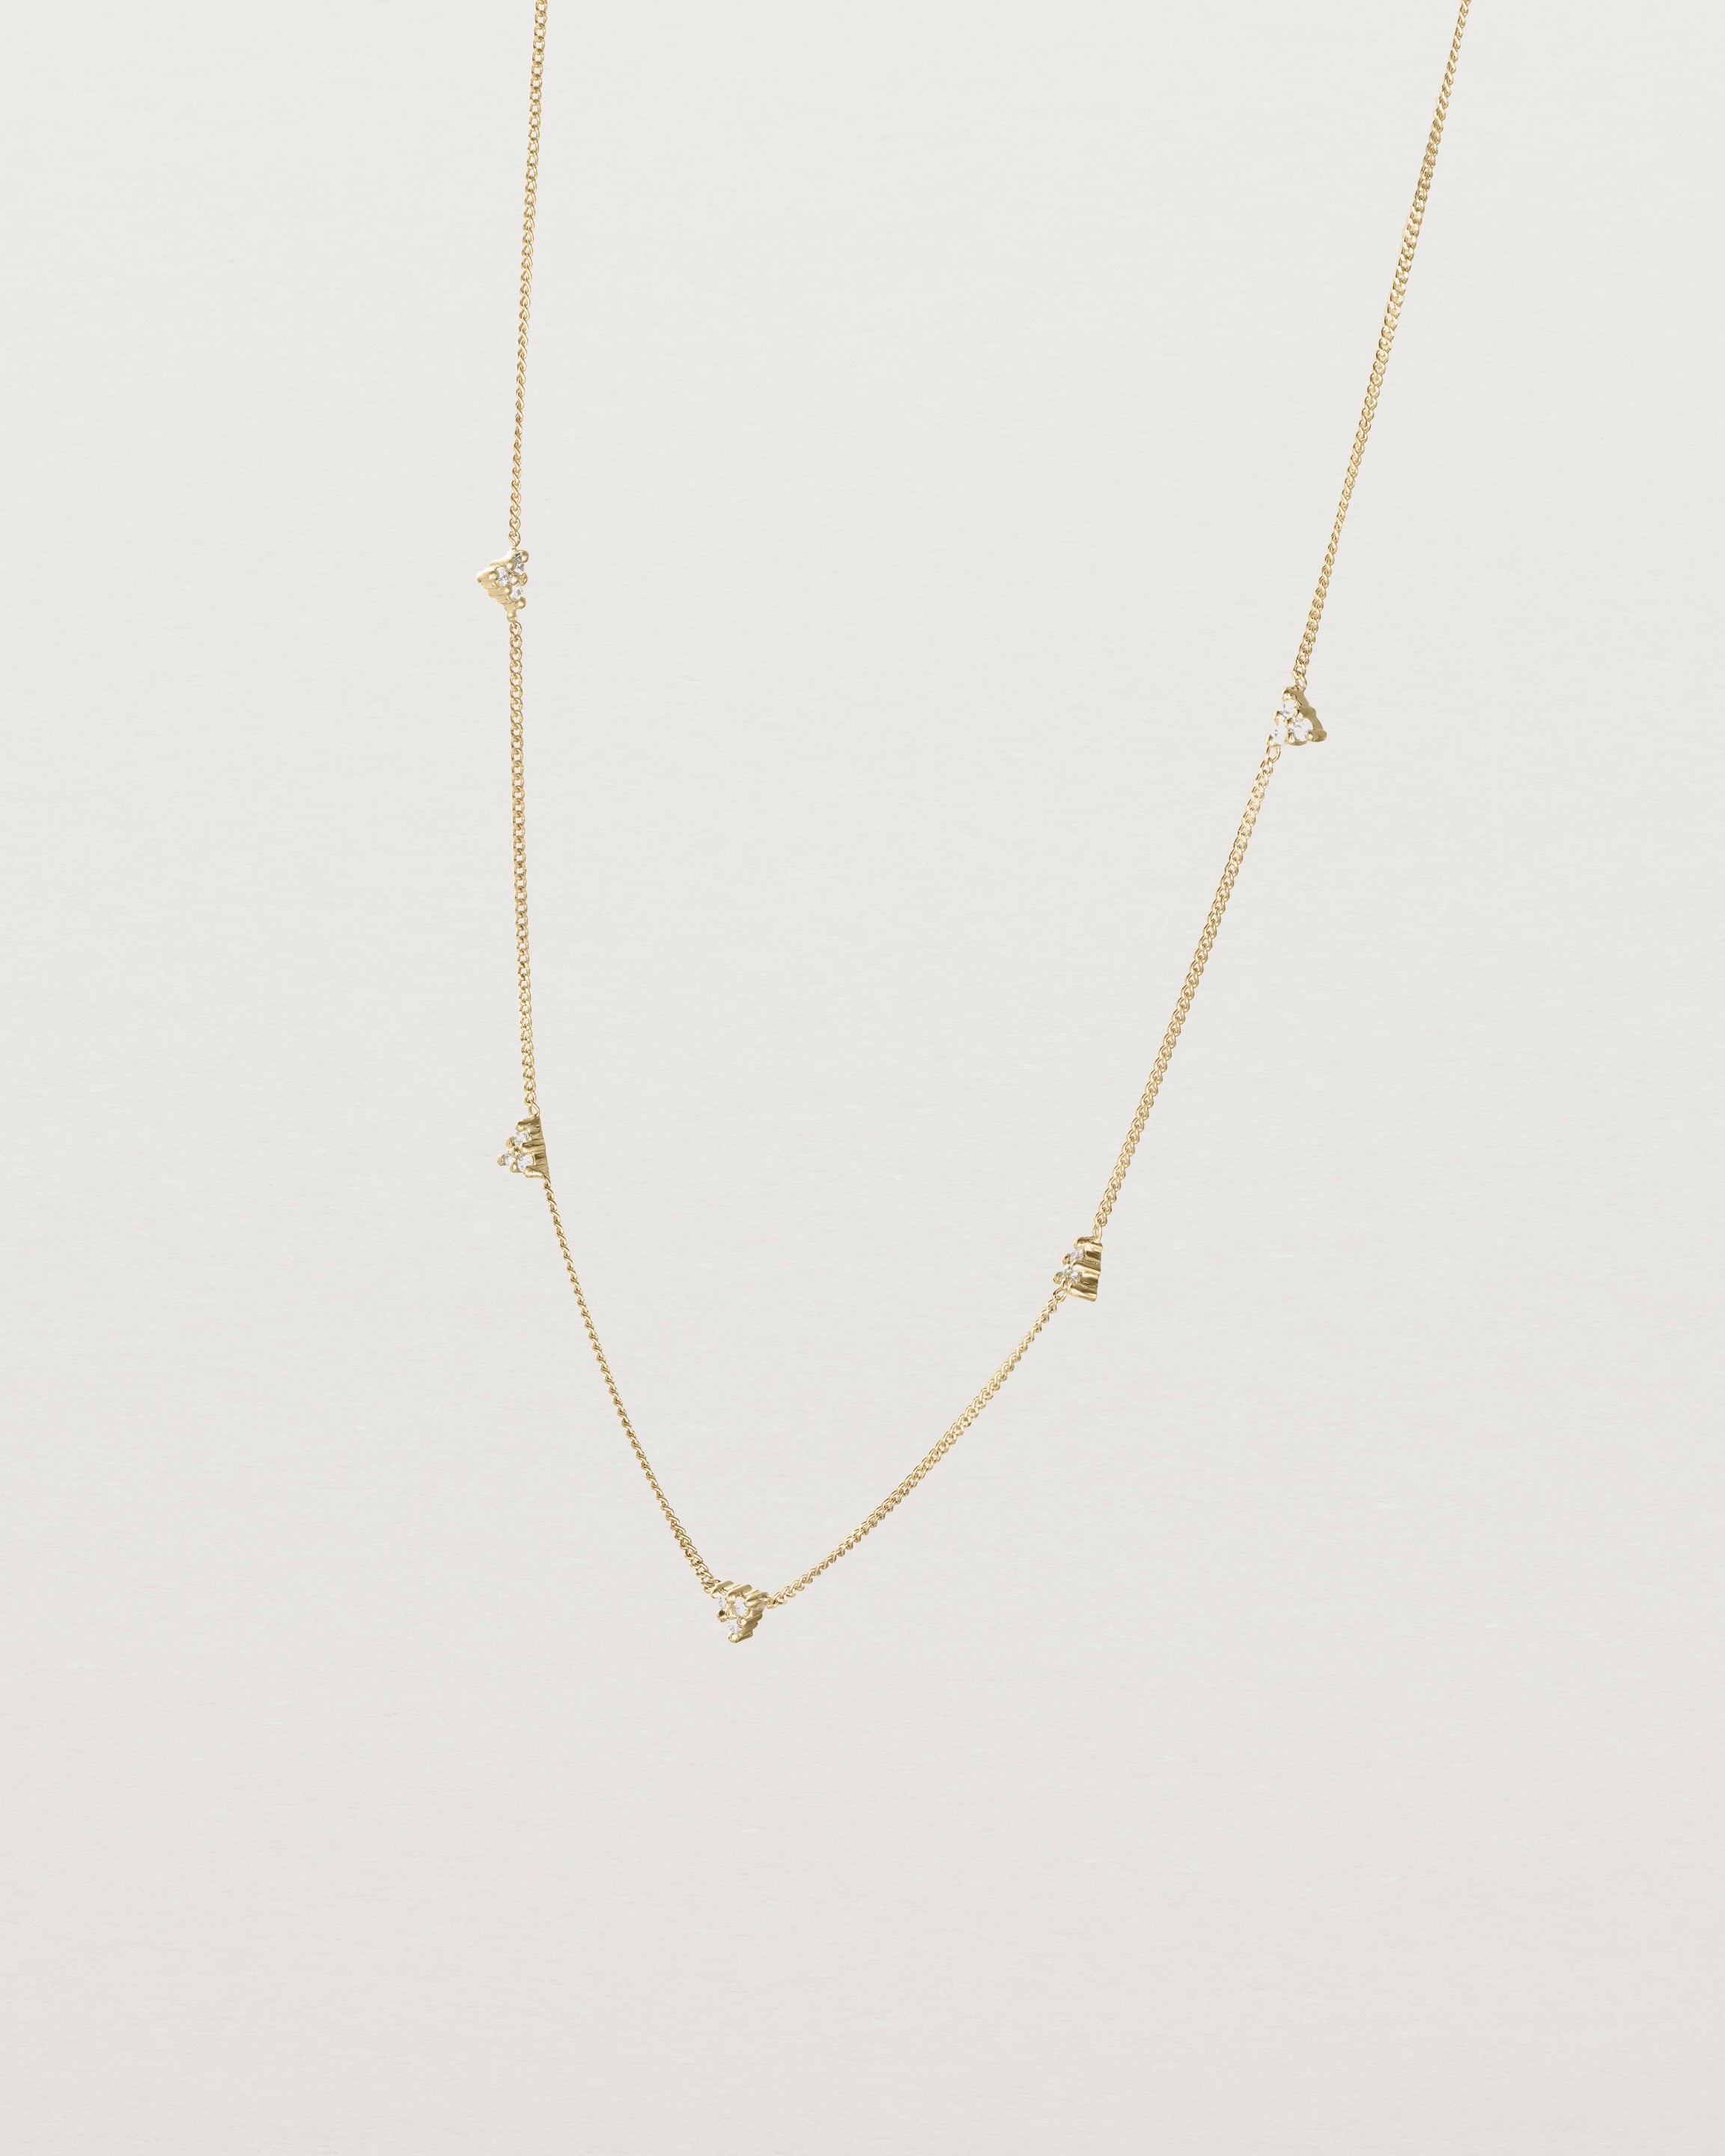 Angled view of the Full Kalani Necklace | Diamonds in yellow gold. 